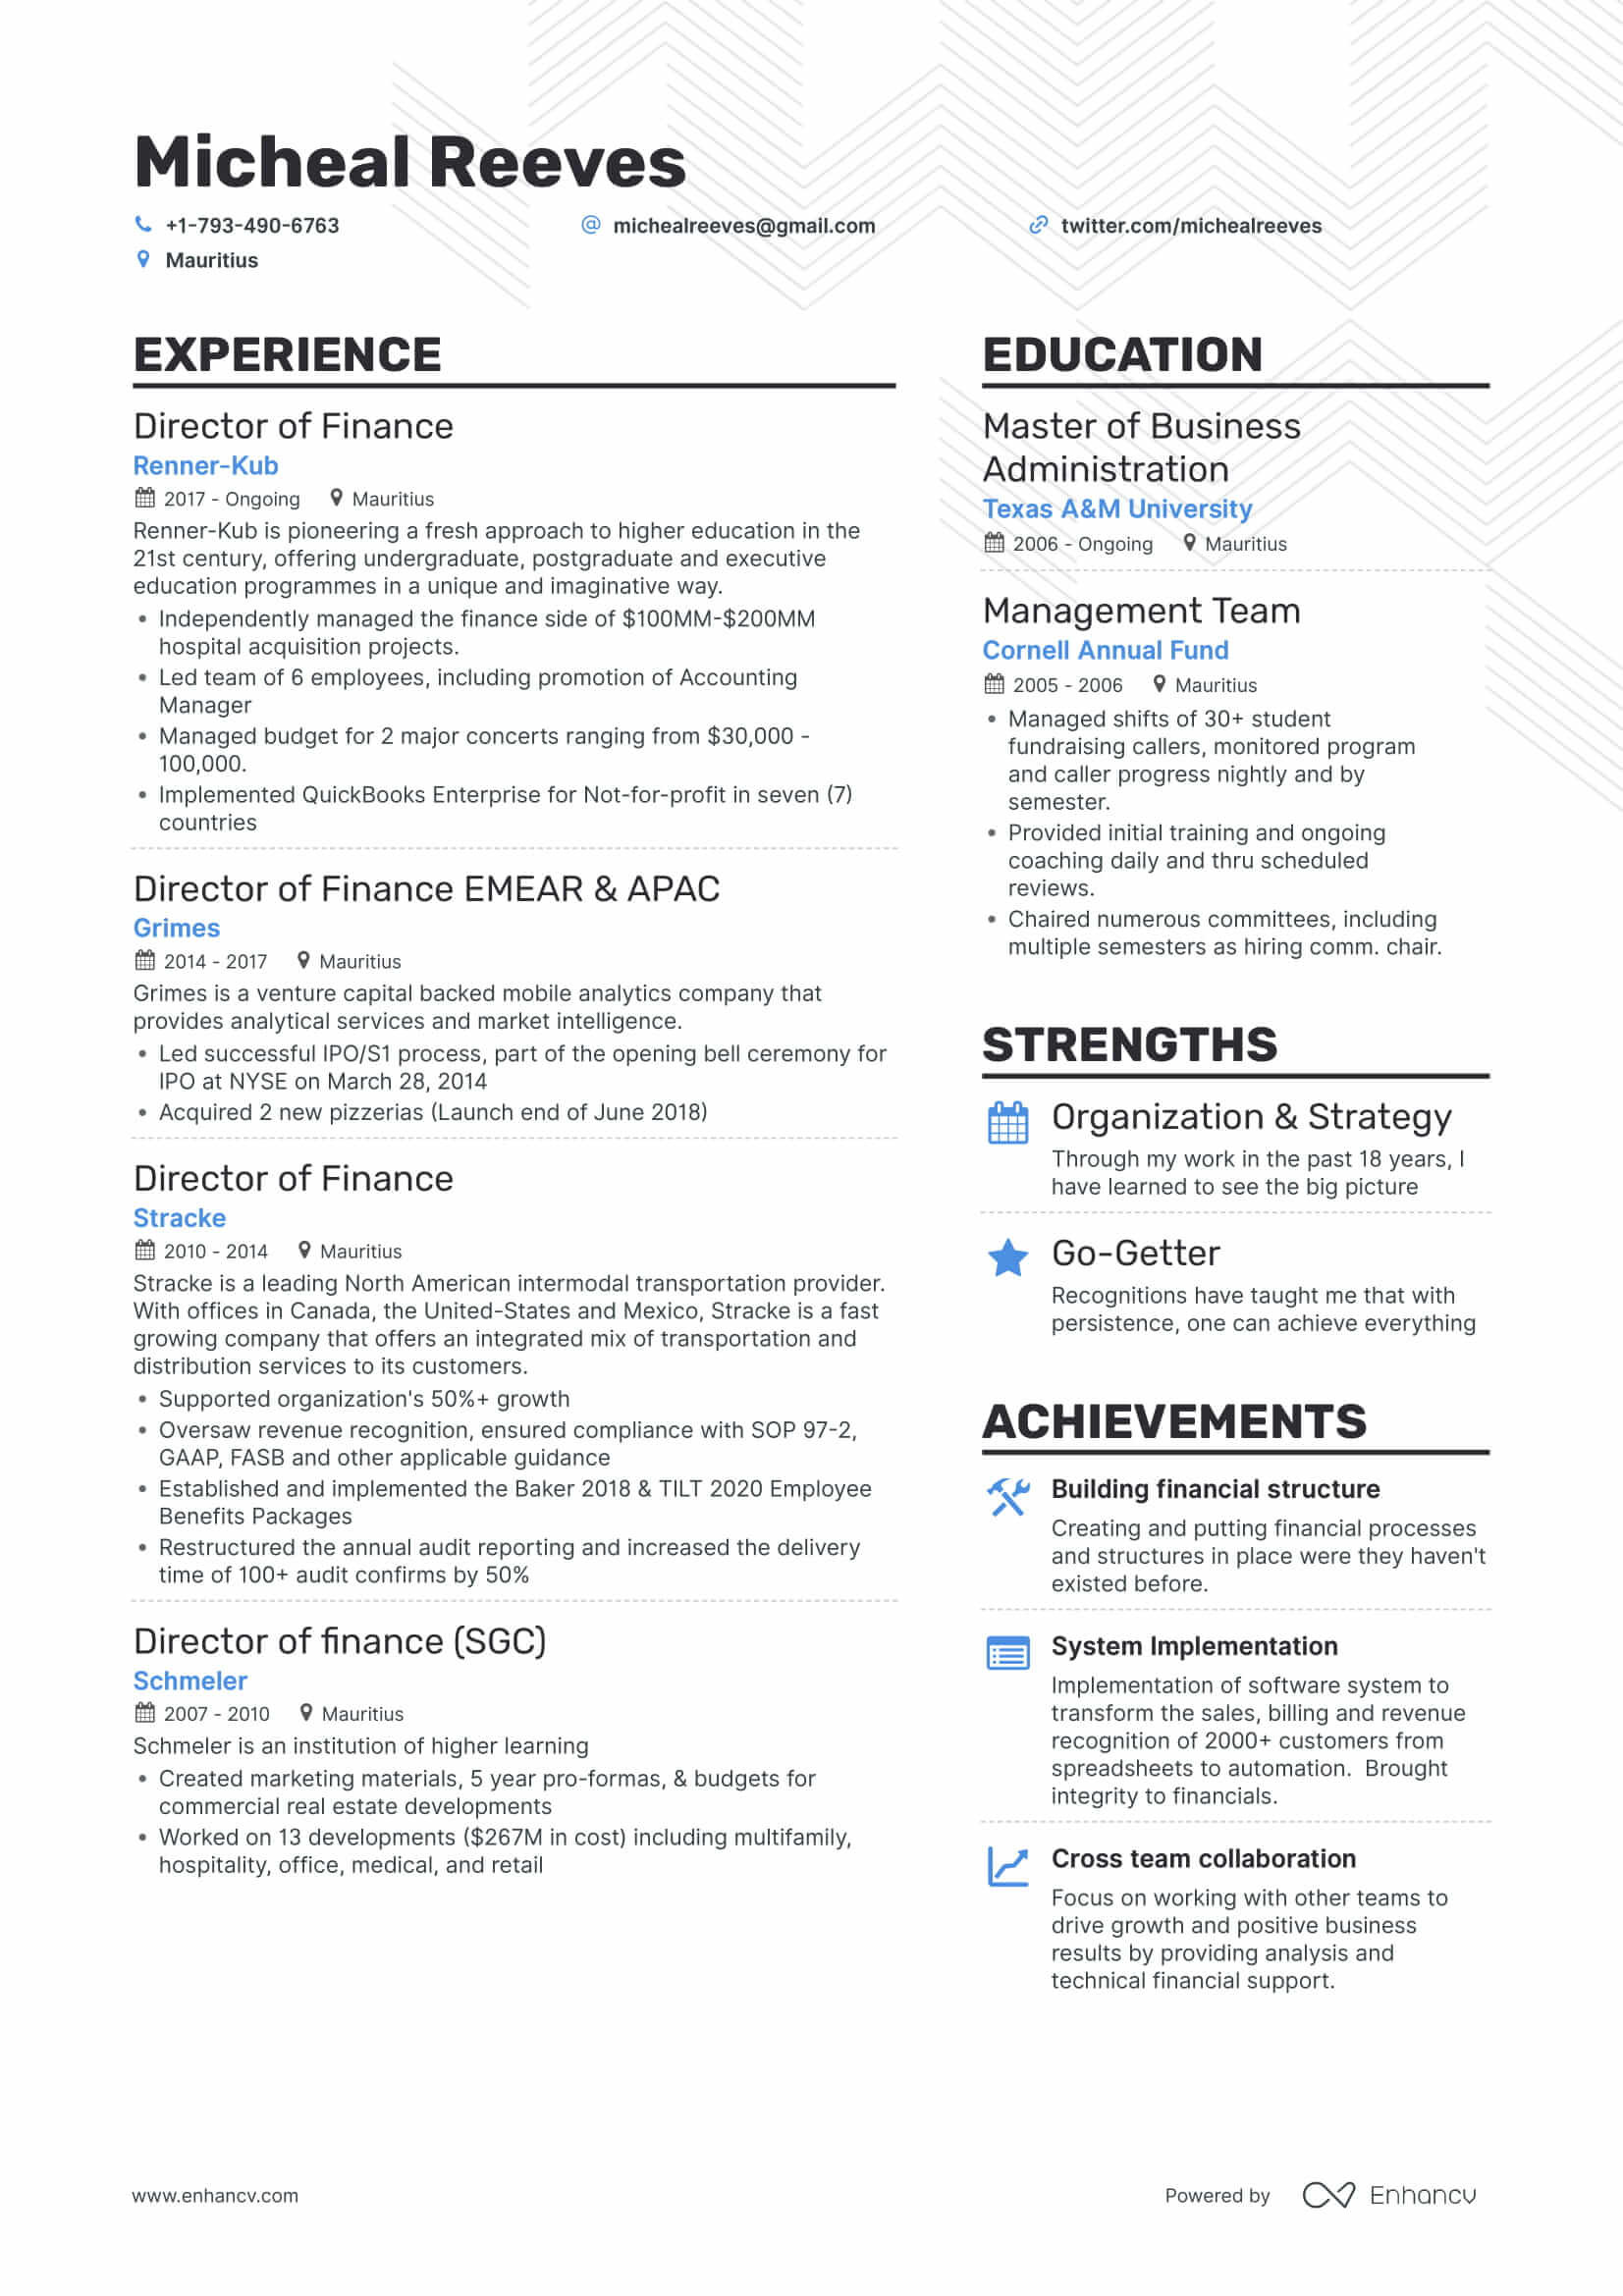 Sample Resumes for Mba Graduate Looking for First Job How to Put An Mba On Your Resume (with Examples)